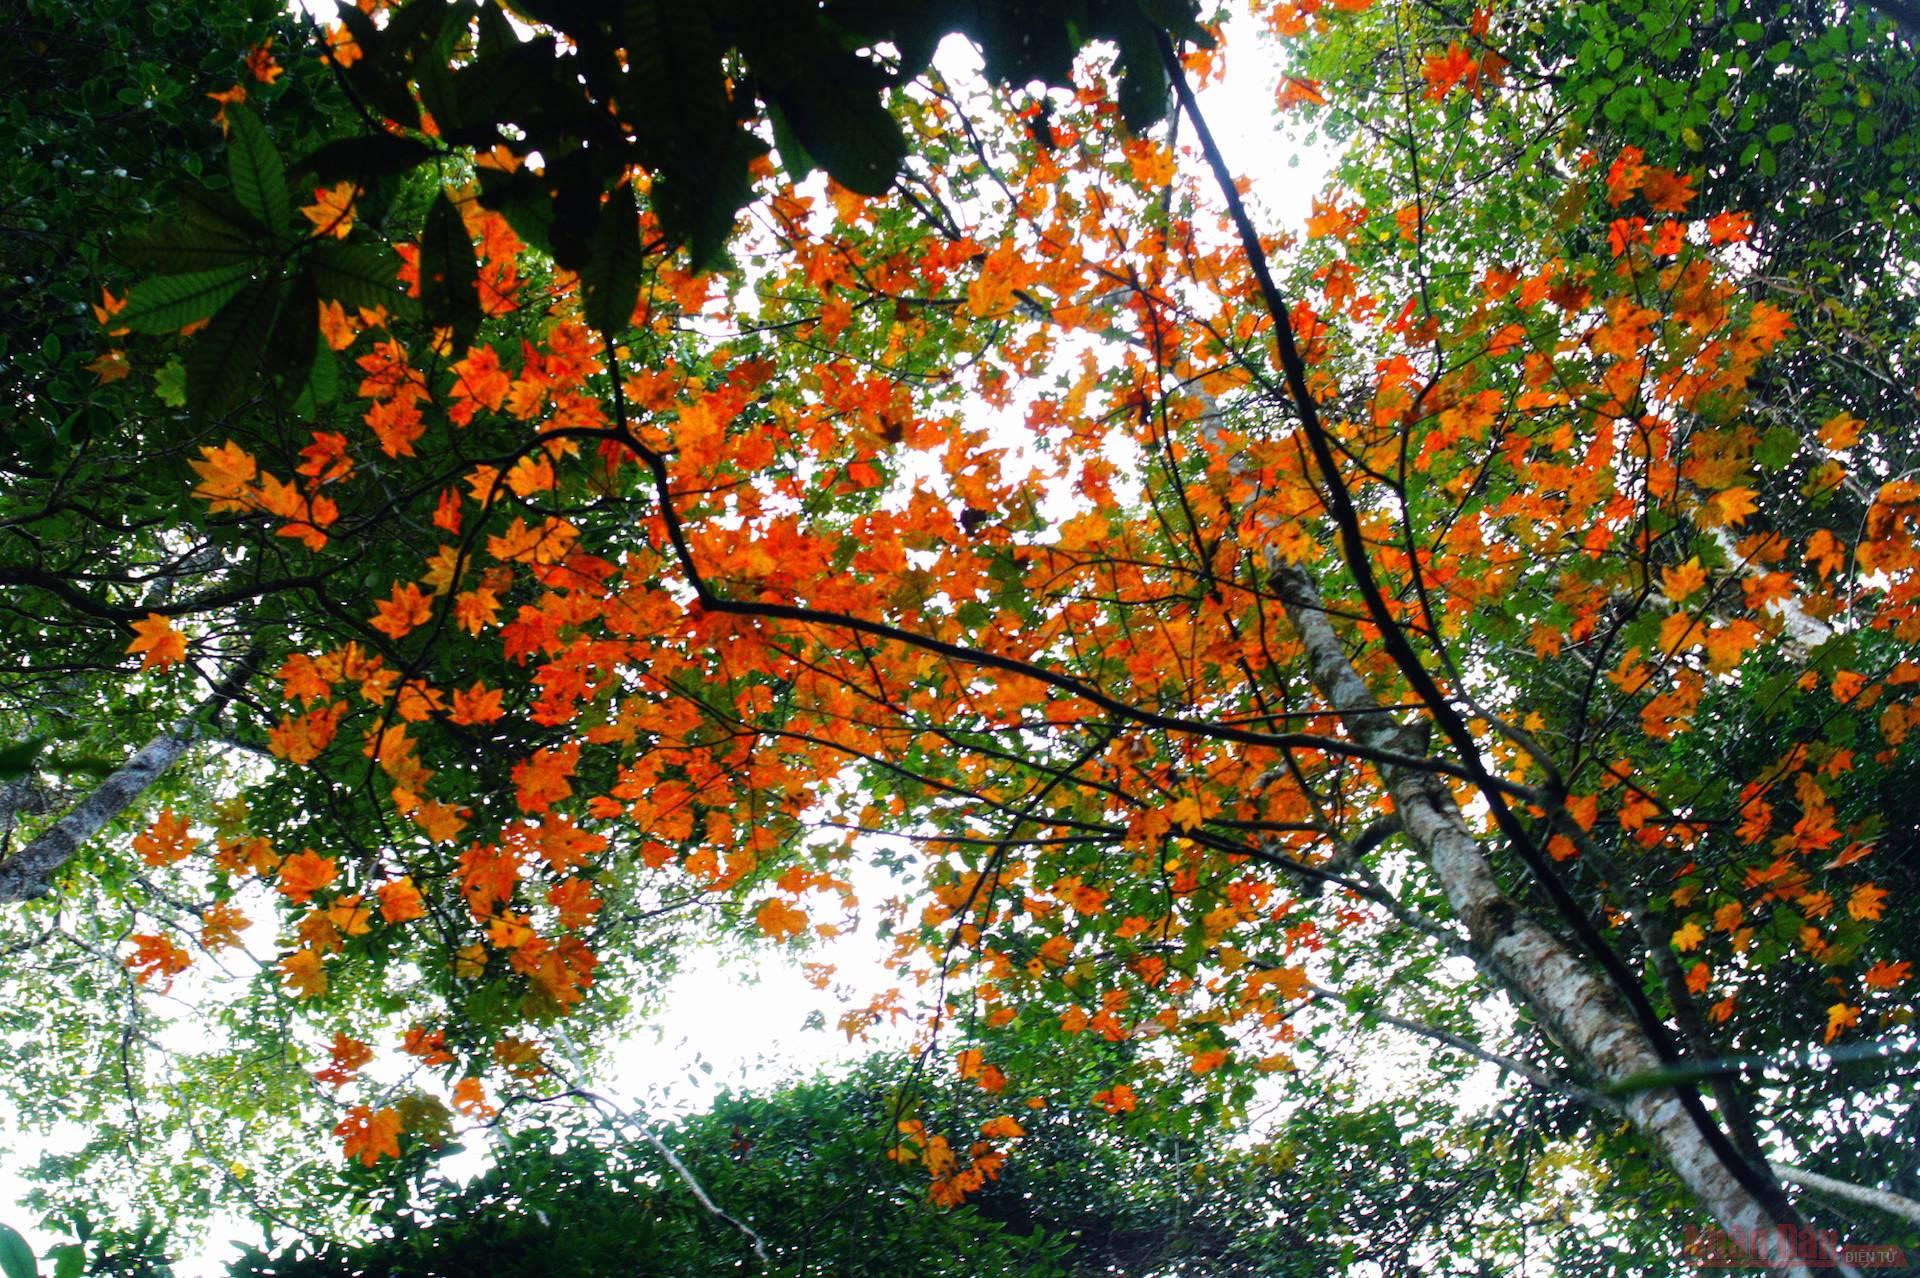 Conquering Mount Pha Luong in season of golden maple leaves